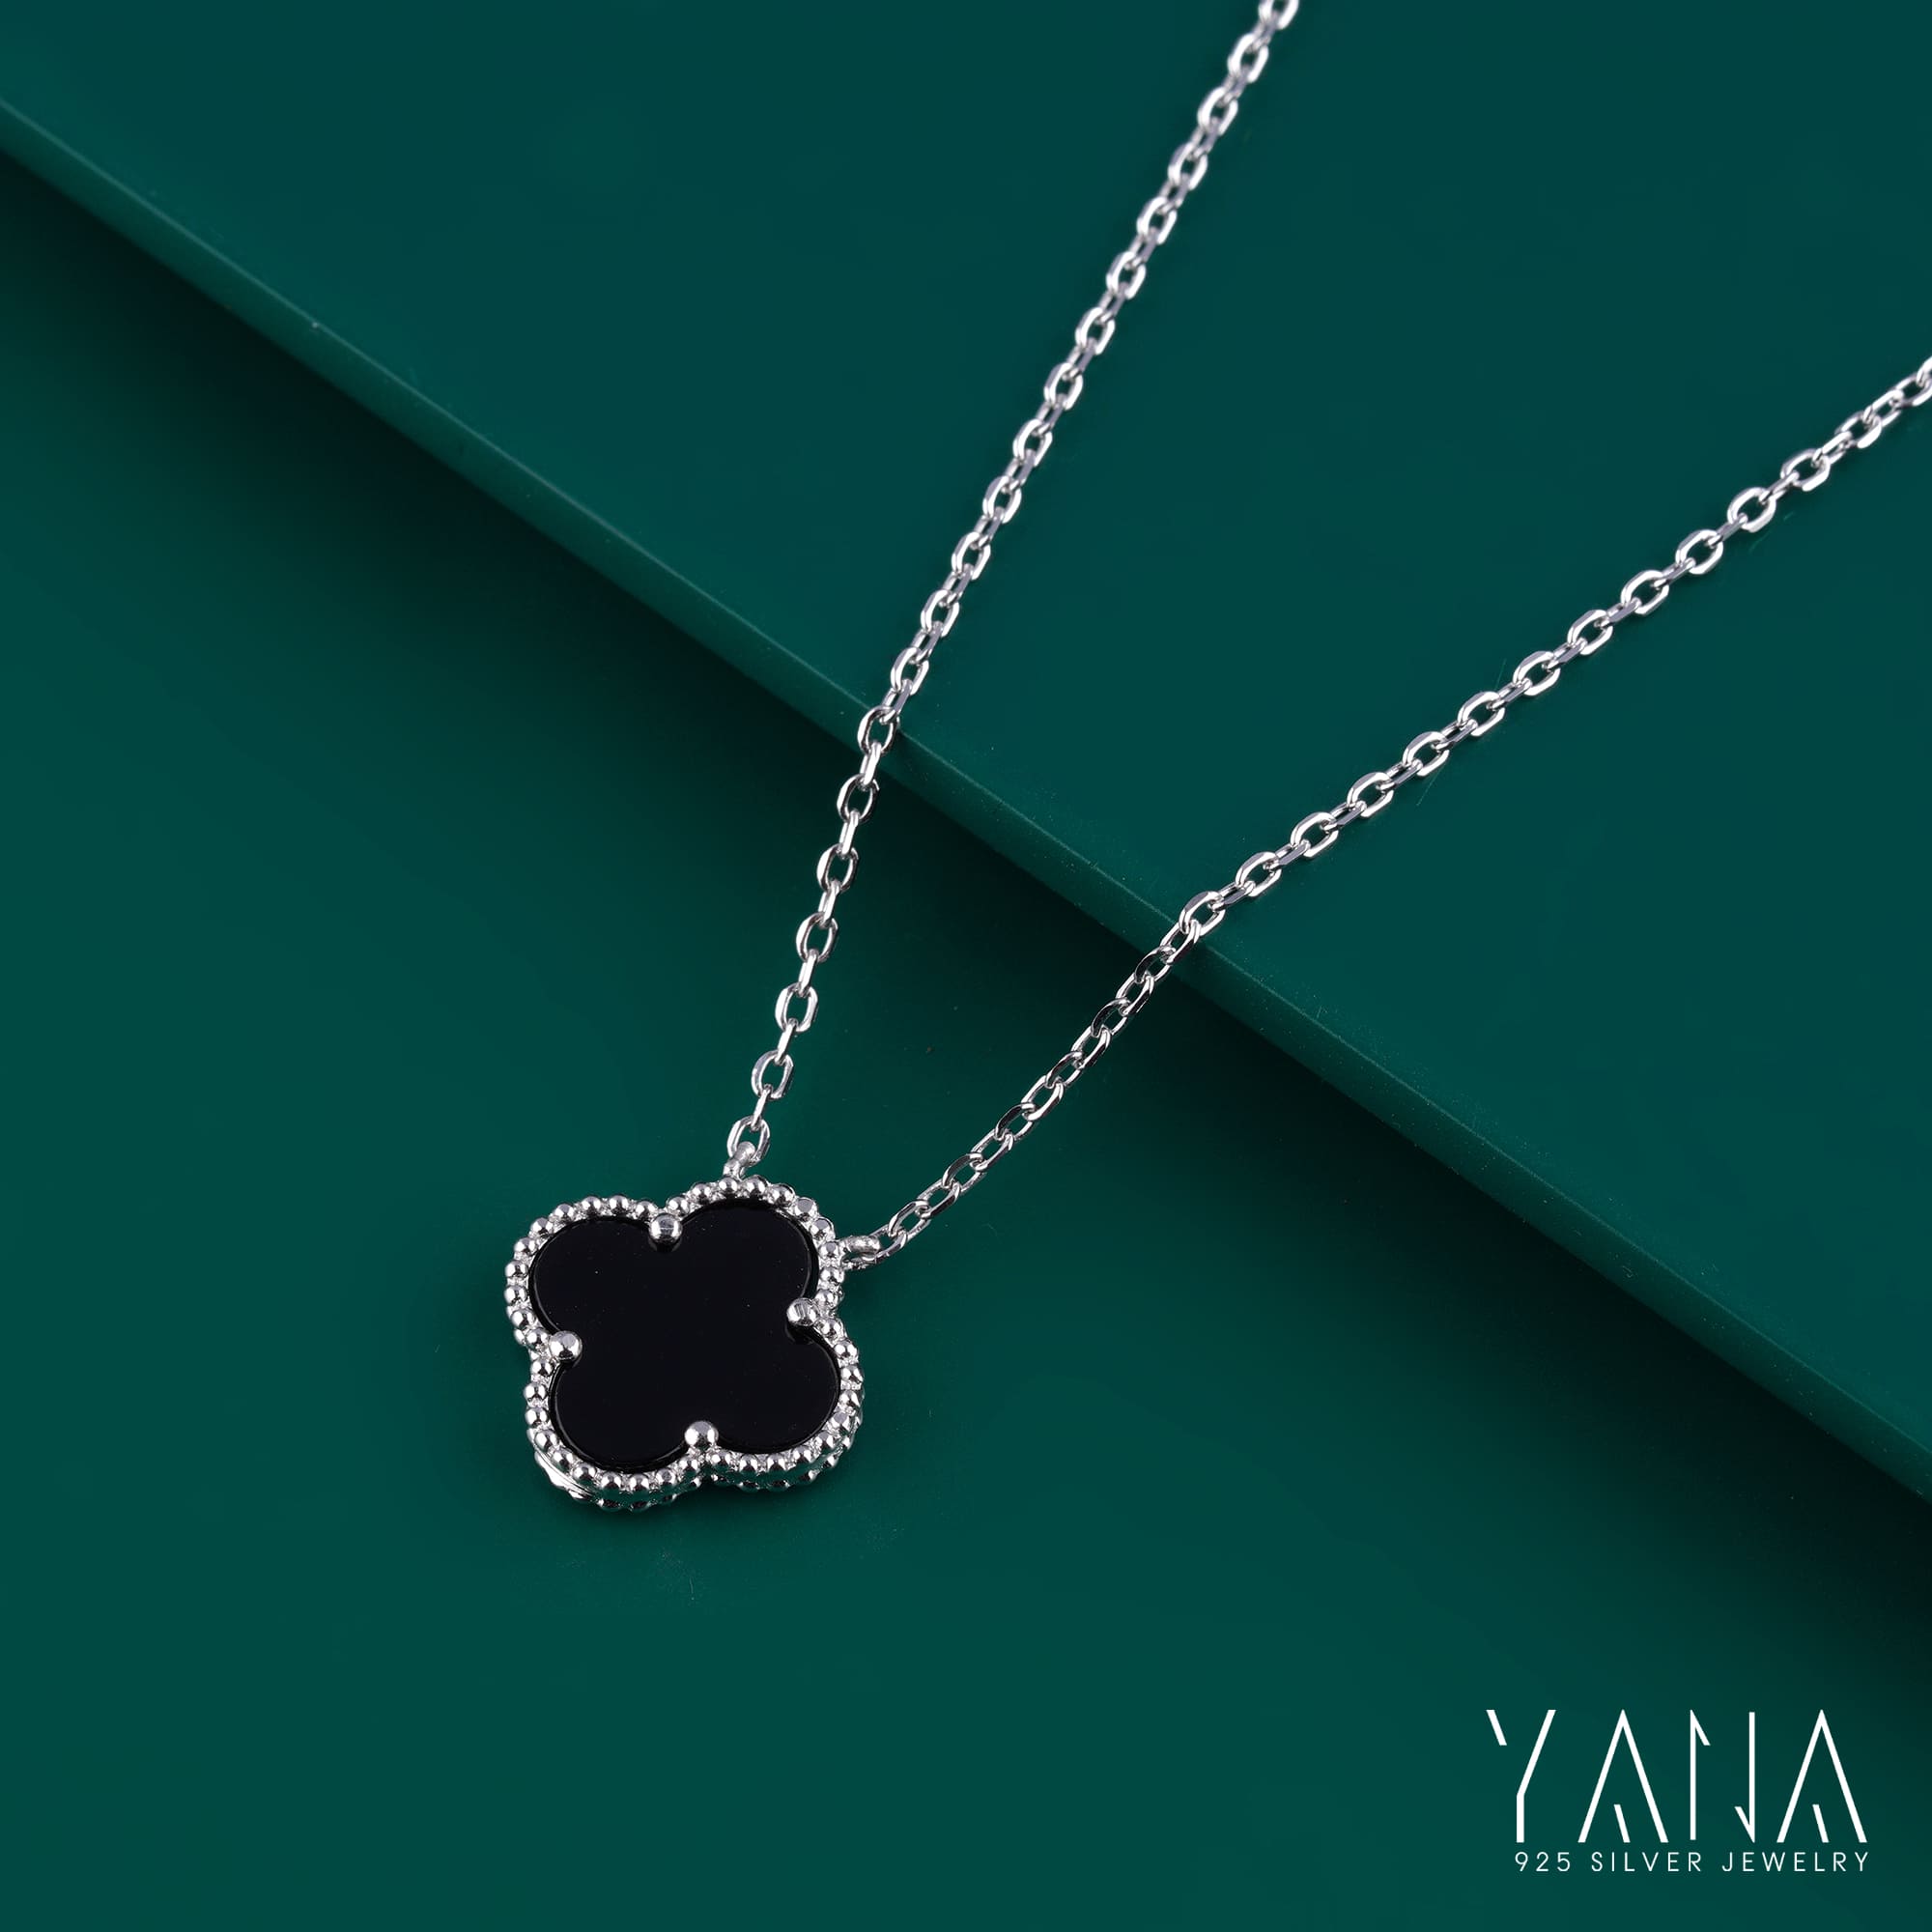 Black Moon Dust clover pendant in white gold plated chain